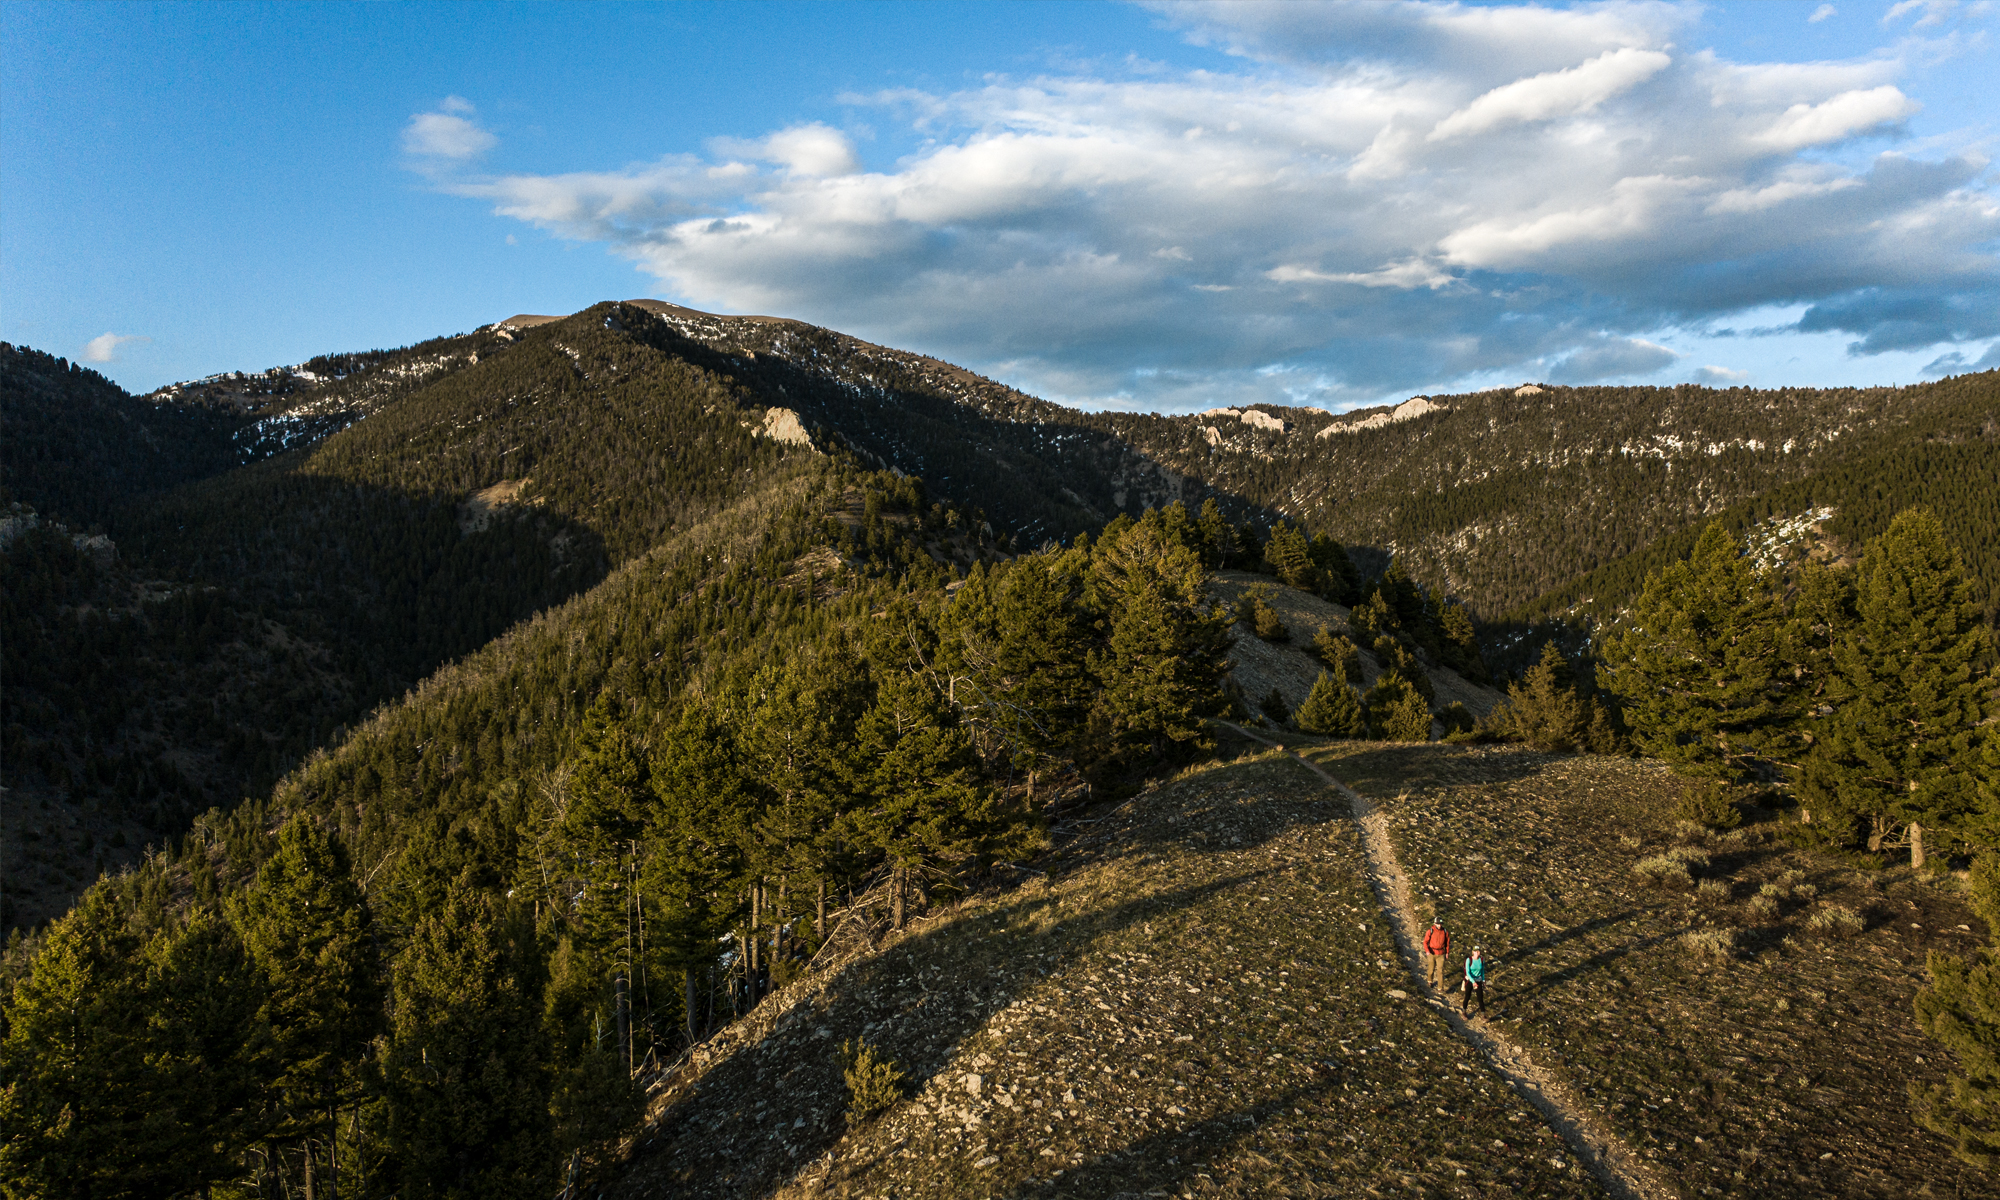 Two people hiking on trail under blue skies wearing Oboz hiking shoes